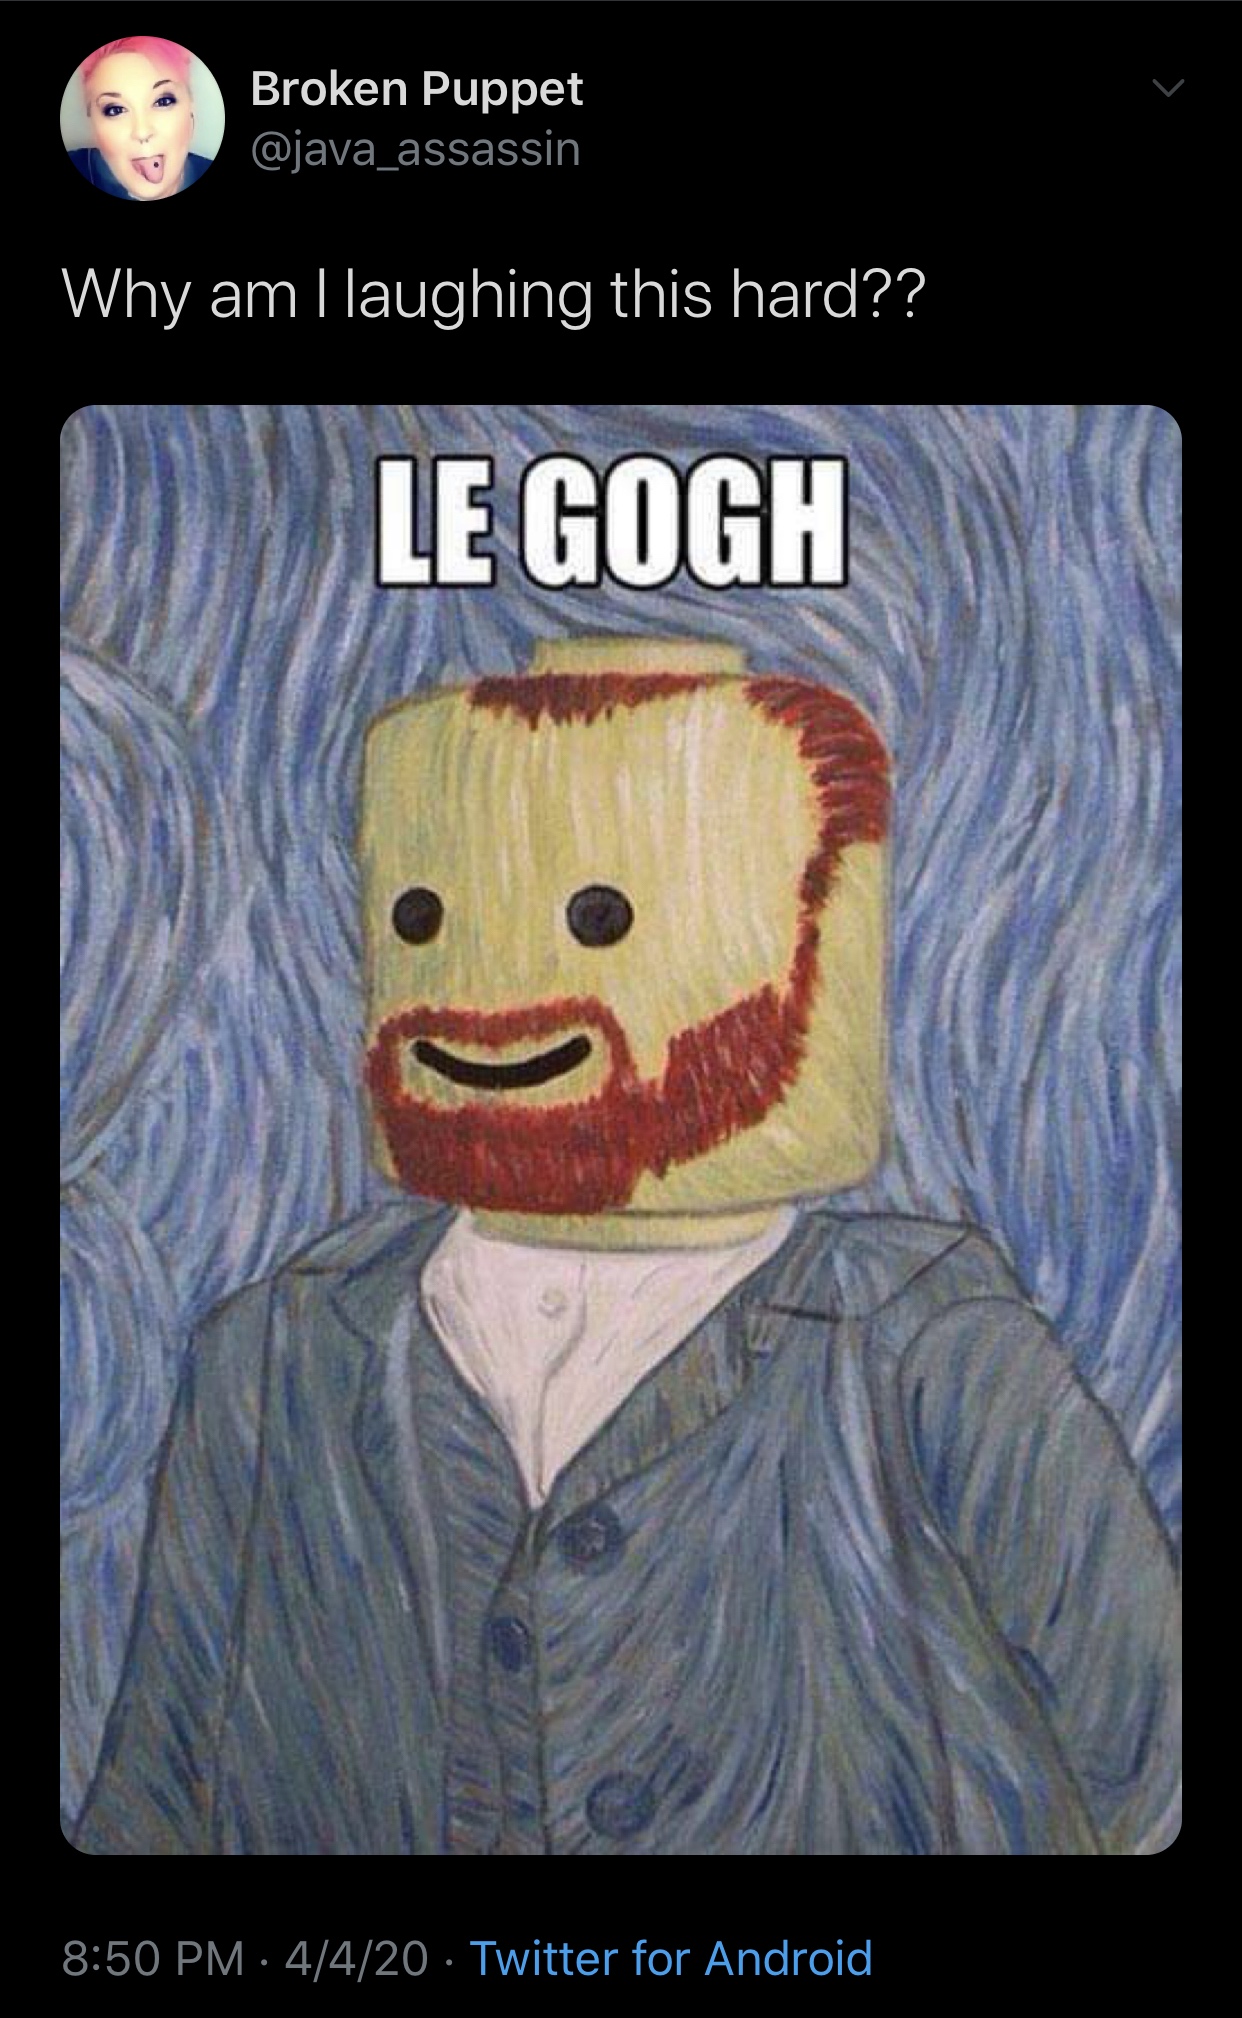 vincent van gogh funny - Broken Puppet assassin Why am I laughing this hard?? Le Gogh 4420 Twitter for Android